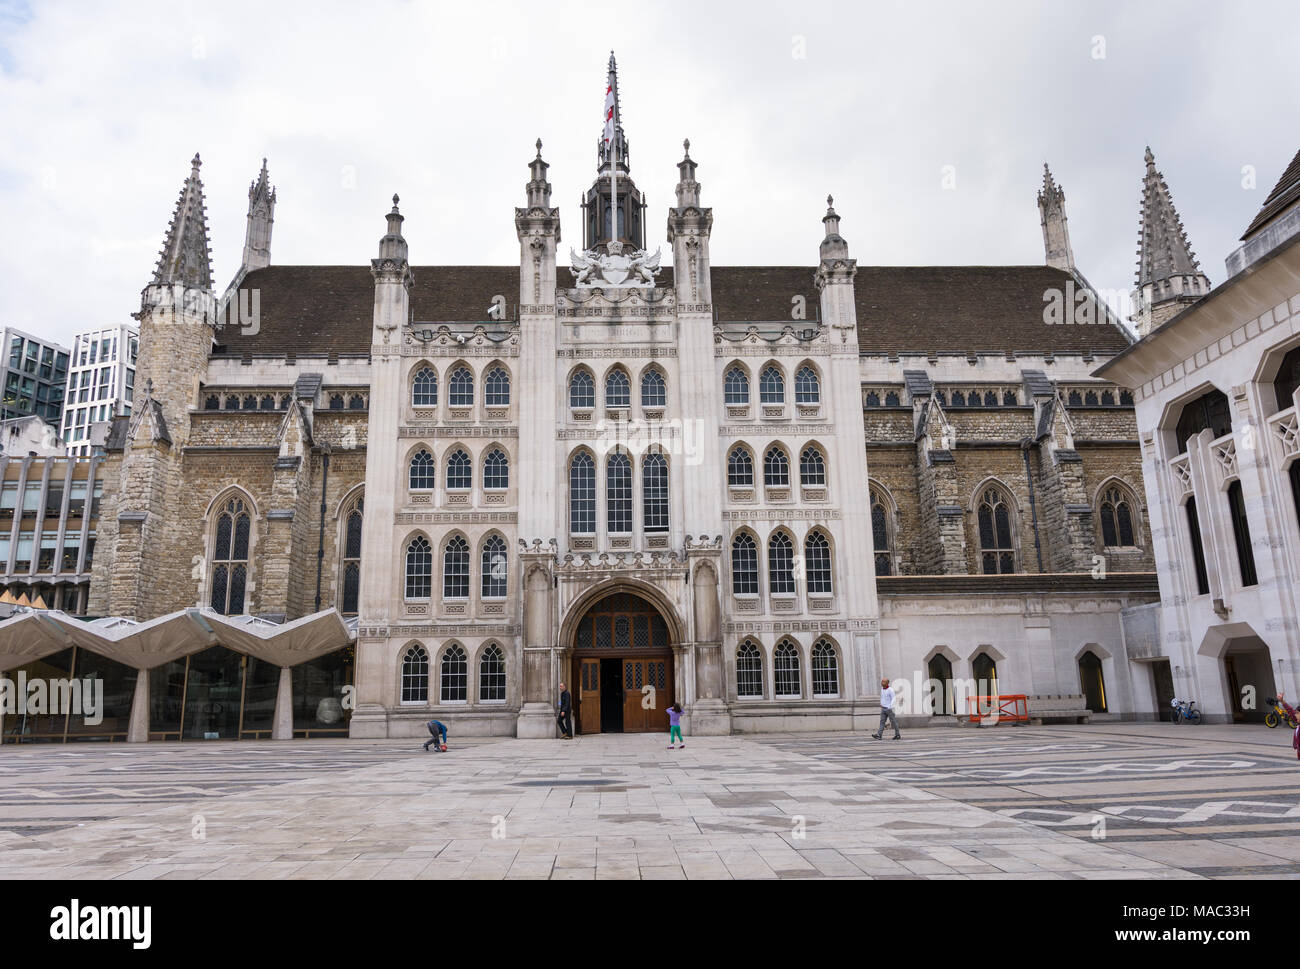 Guildhall, City of London, England. Courtyard and Facade of Historical Town Hall Stock Photo